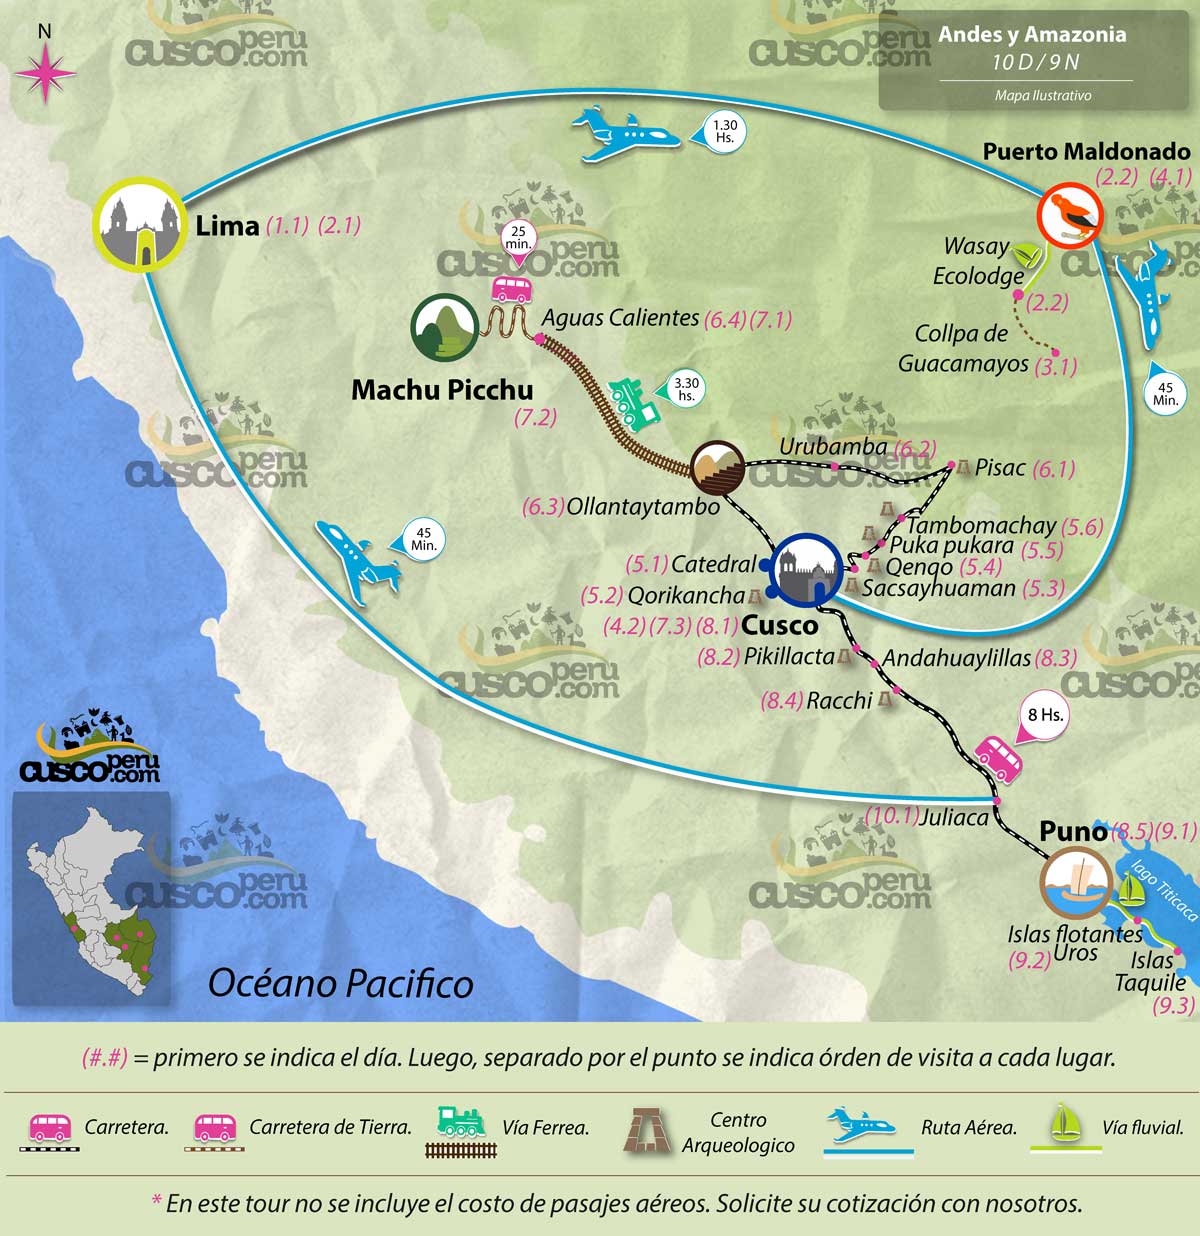 mapa tour andes y amazonia 10 d 9 n